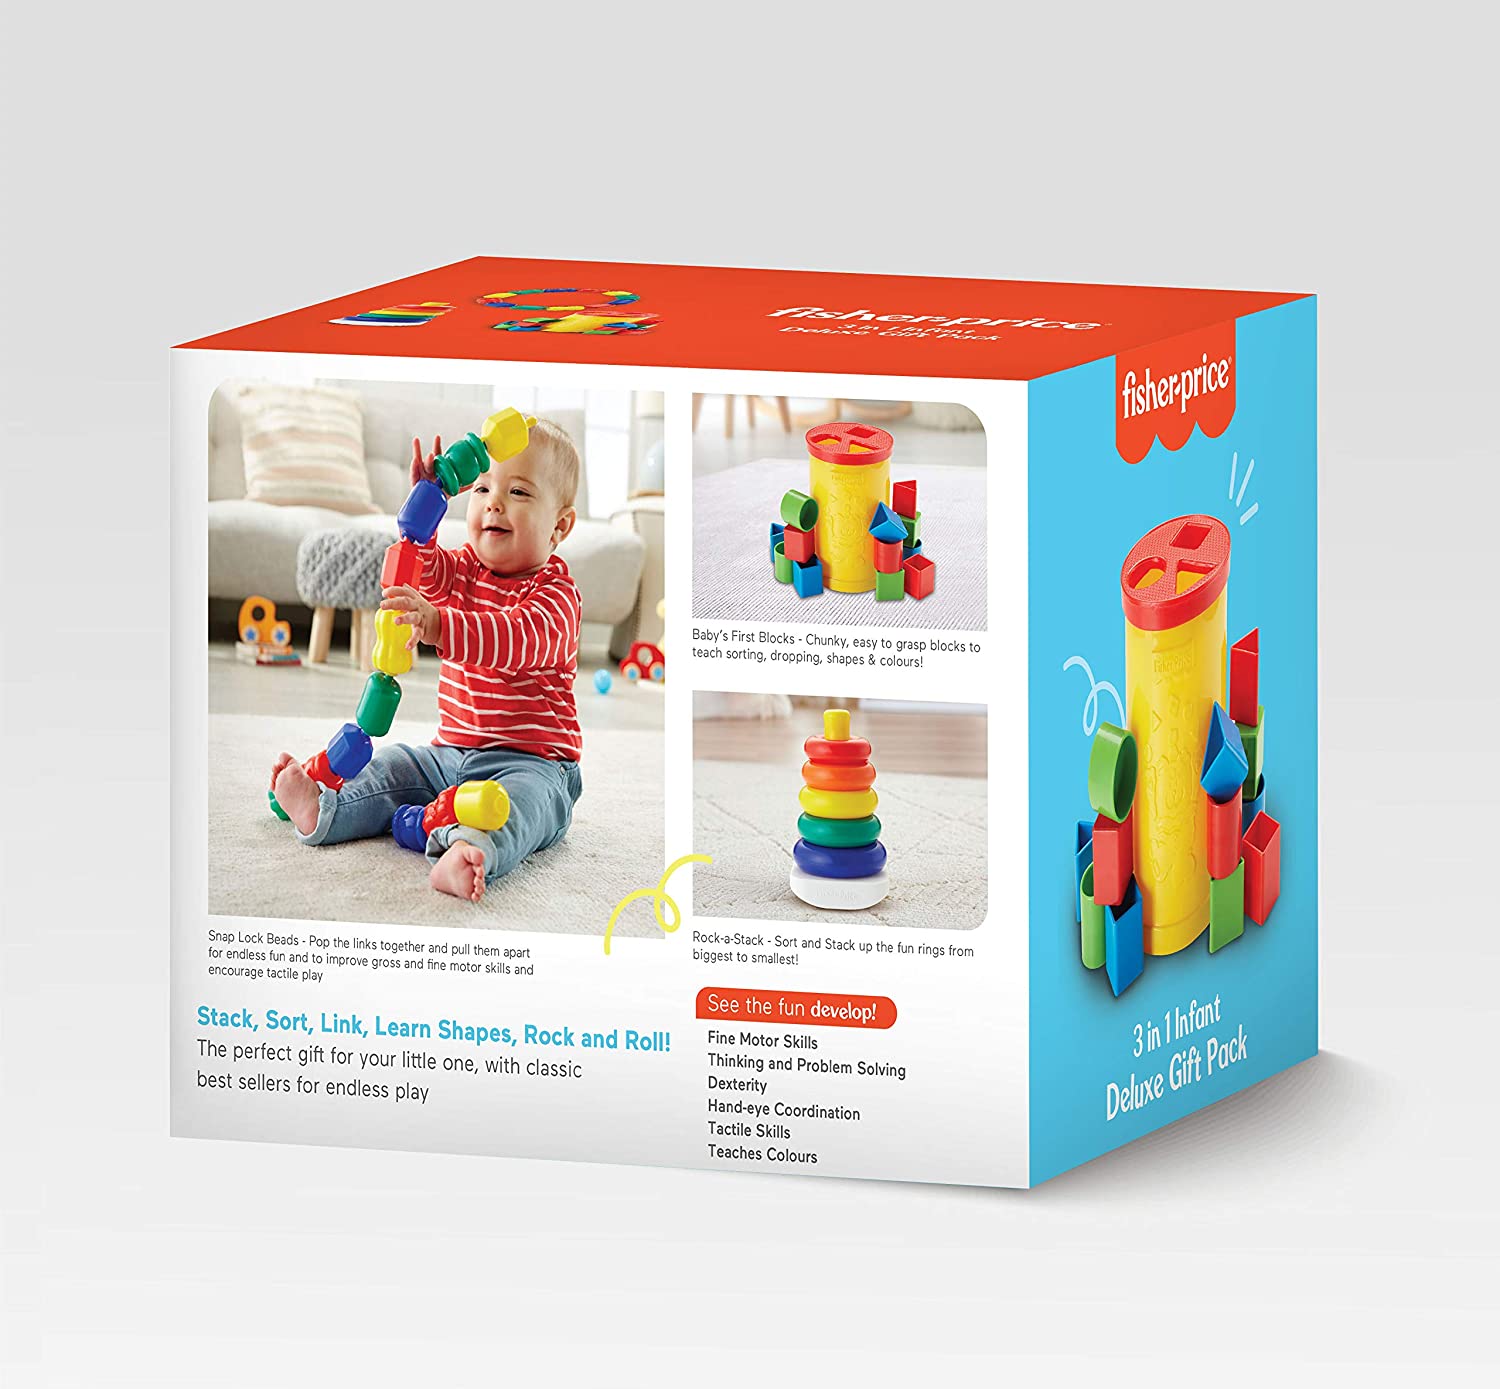 Buy Fisher-Price 3-in-1 Infant Deluxe Gift Pack online at Best Price in India from kiddiewonderland.in. Explore Fast and free delivery across India with special discount offers. 